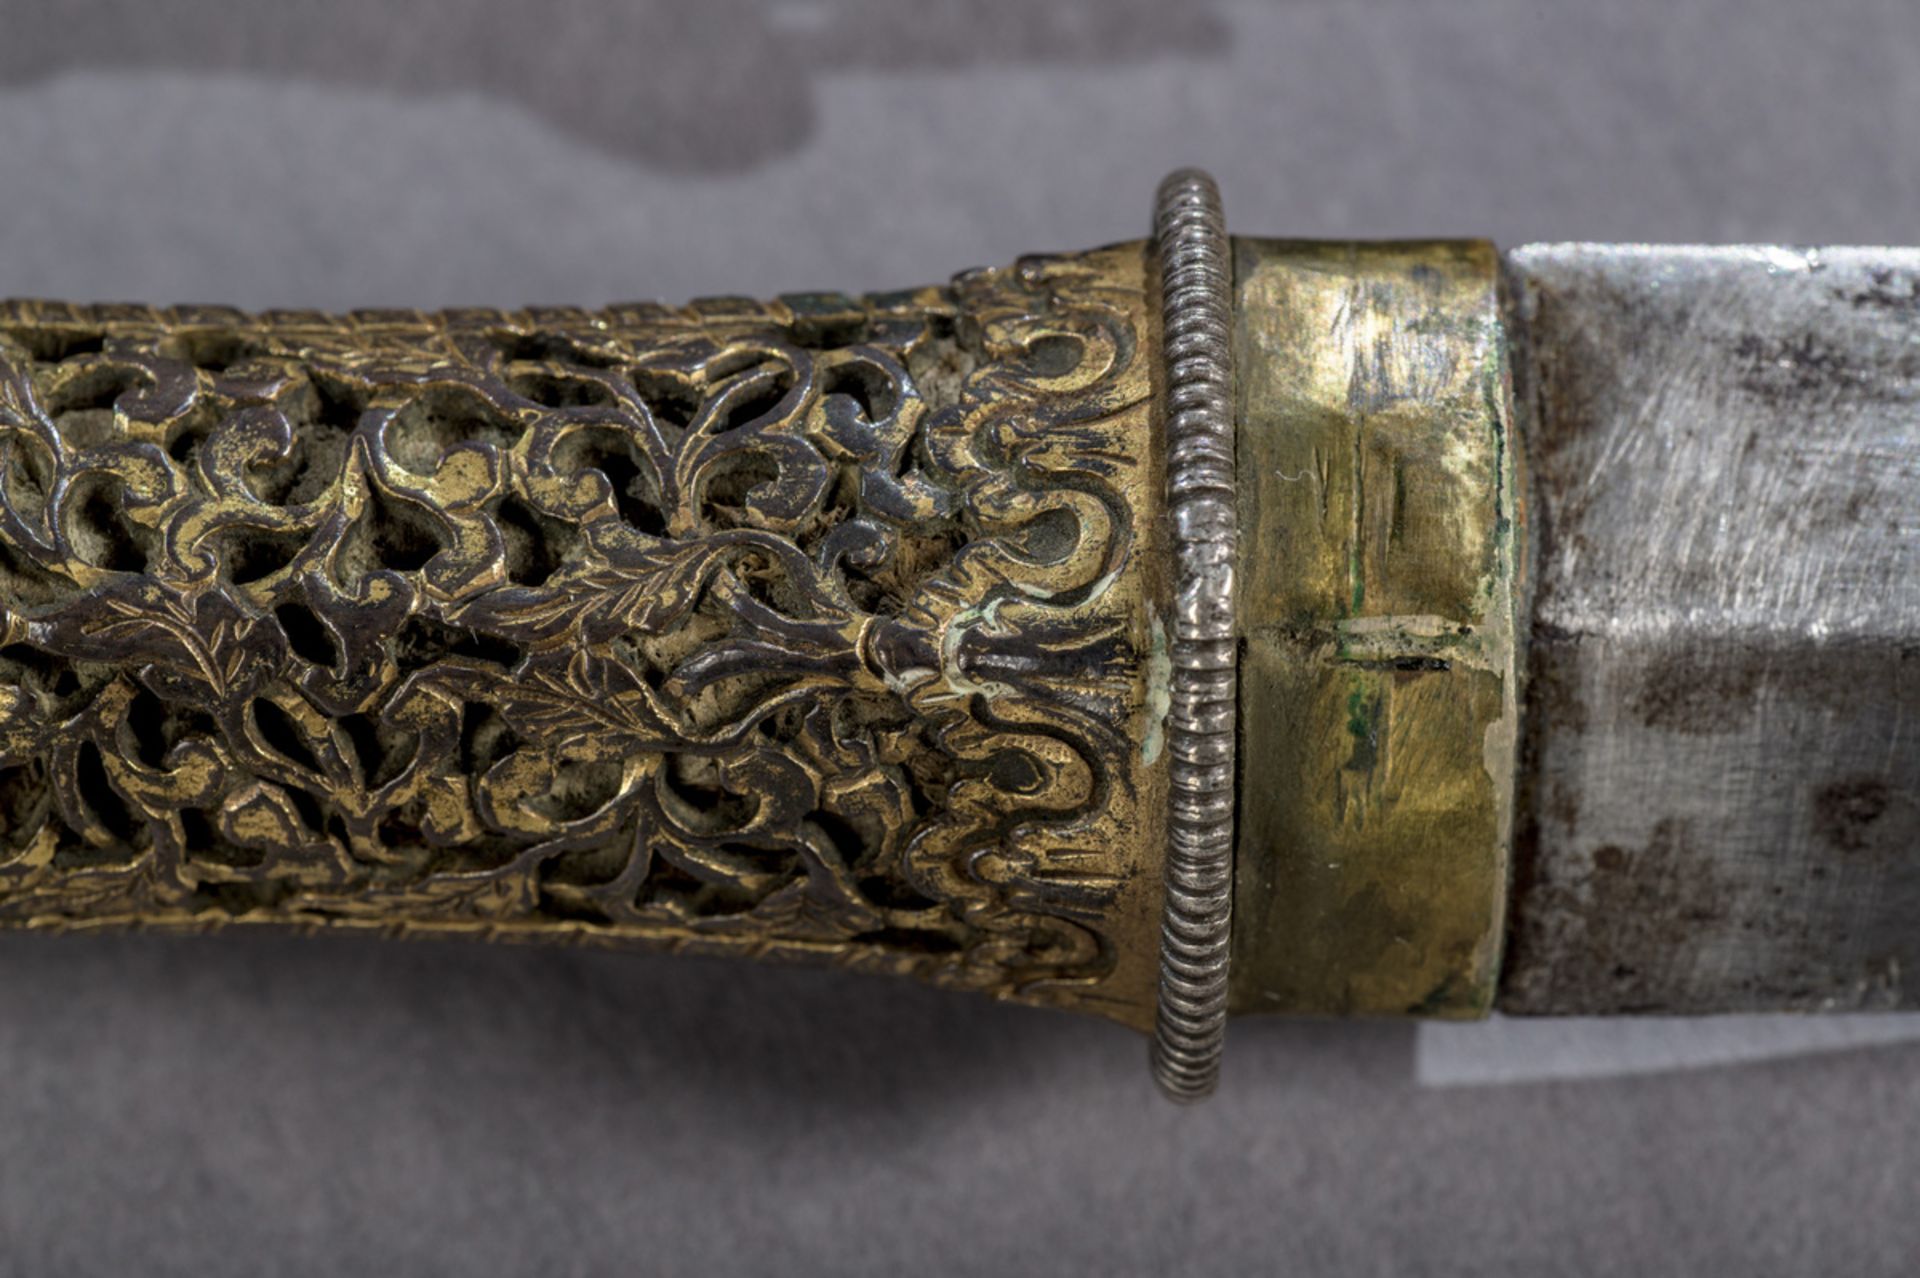 A dagger with openwork iron and gilt bronze decoration, Bhutan 18th - 19th century (tot 46.5 cm) - Image 5 of 7